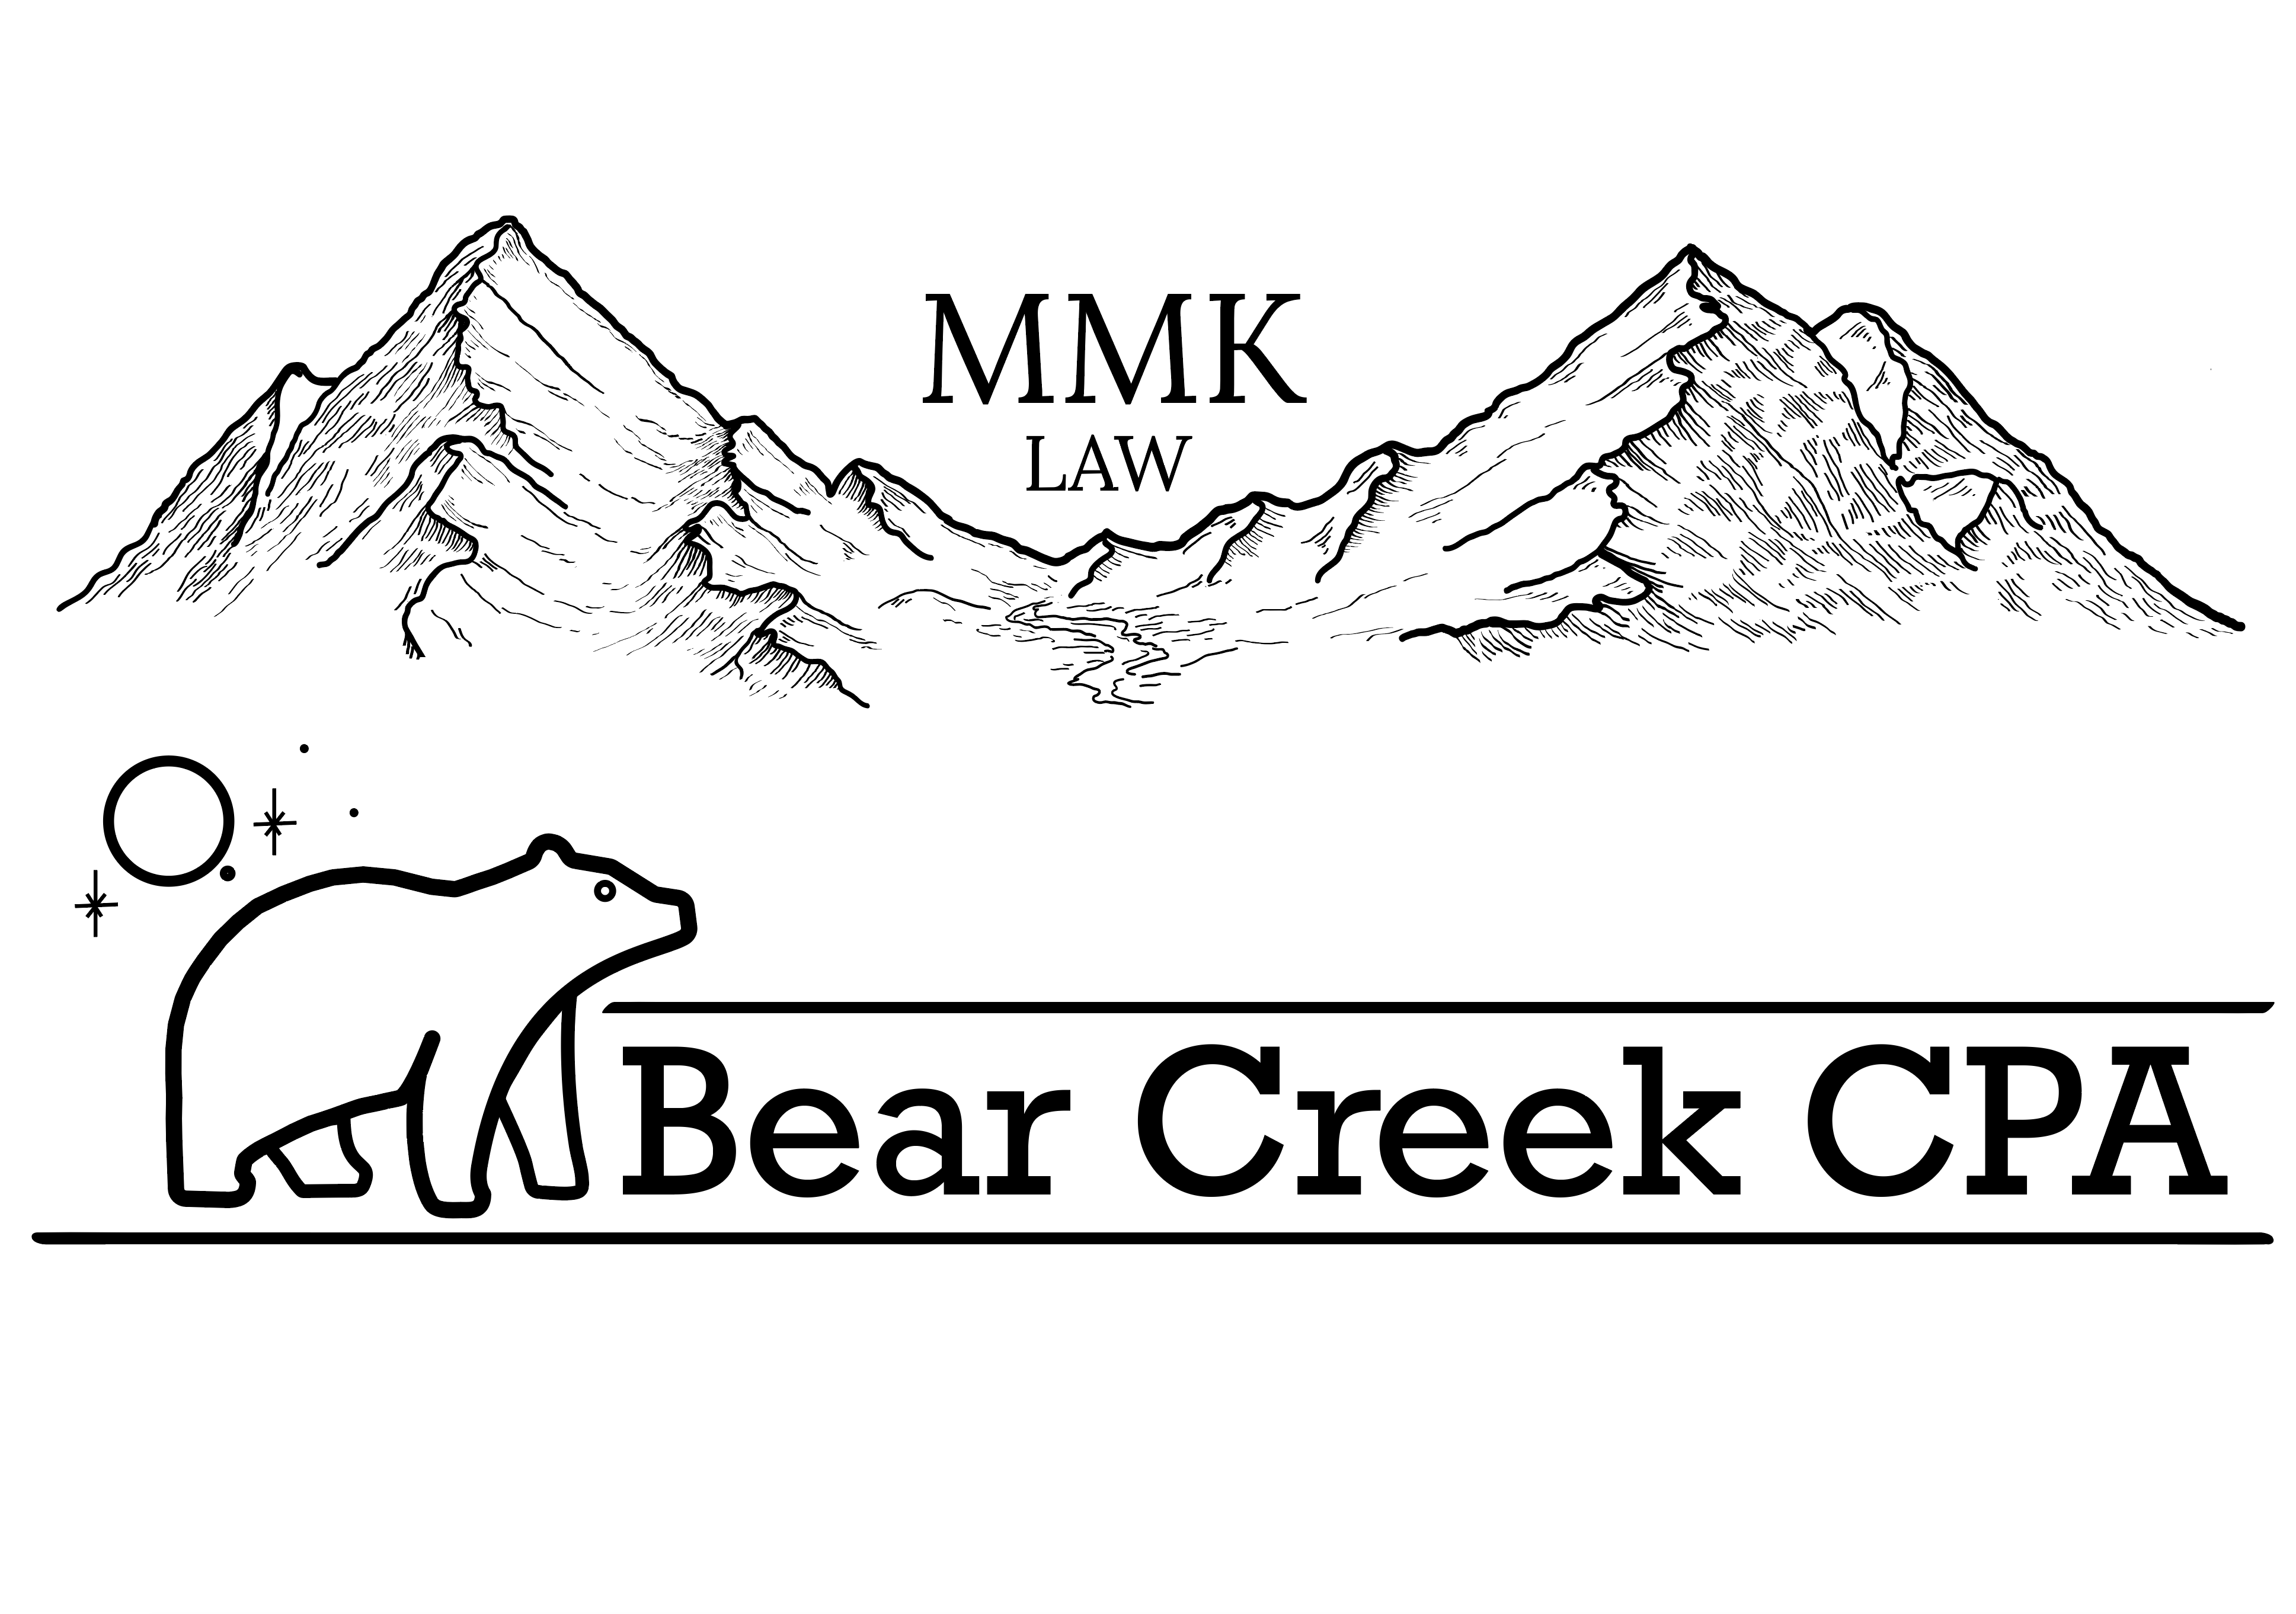 Logos for MMK Law and Bear Creek CPA